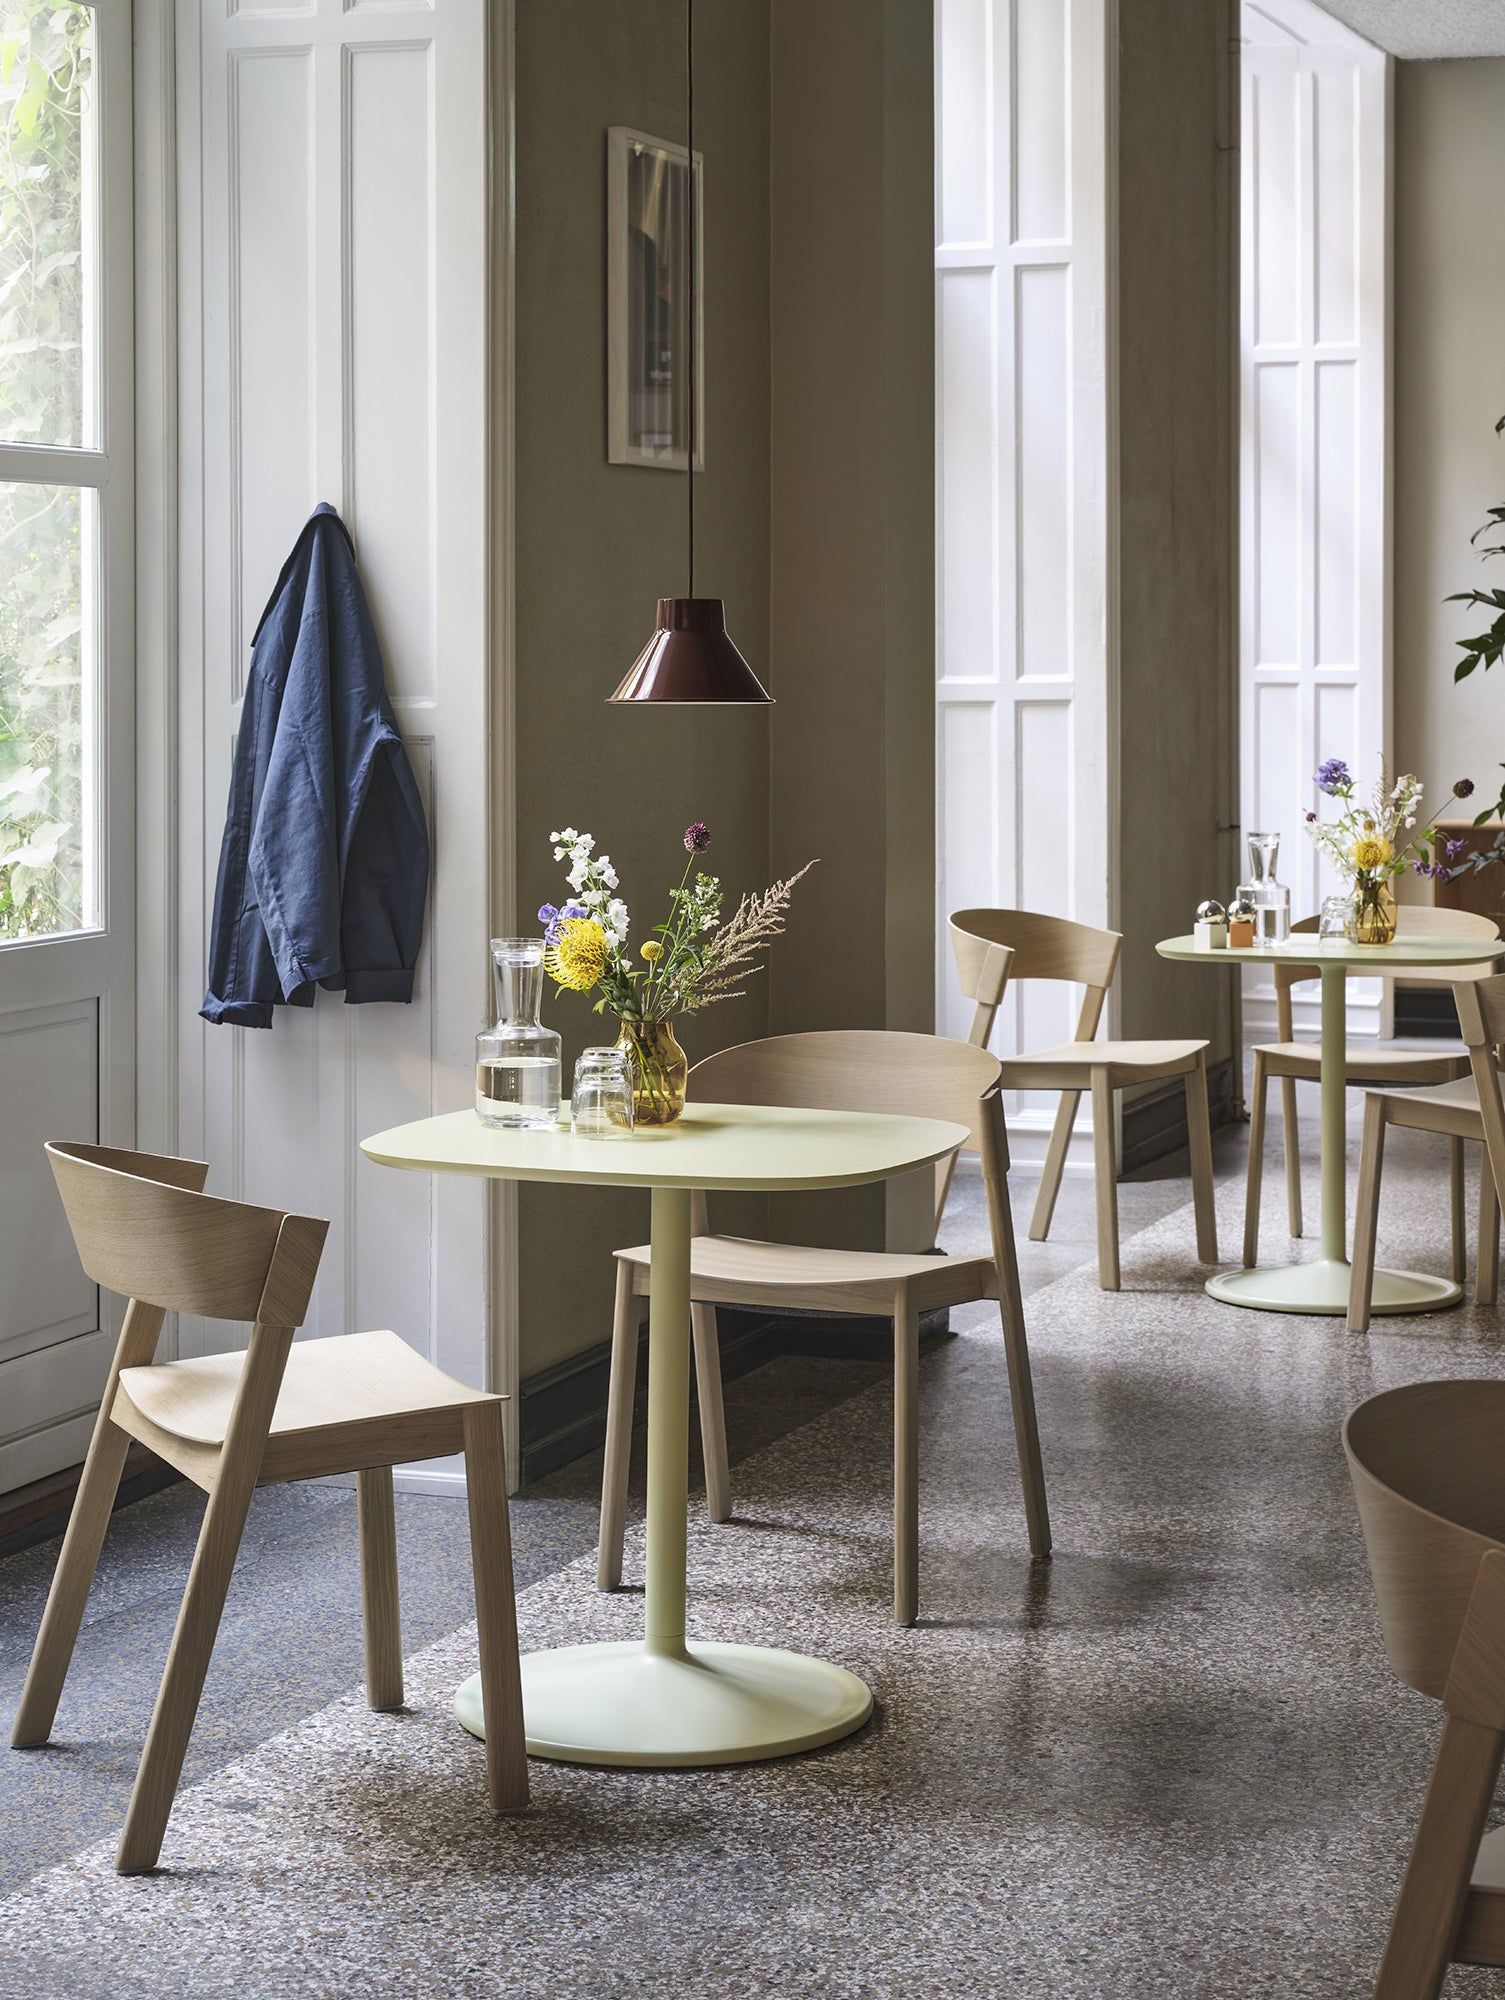 The Timeless Elegance of Wooden Dining Chairs